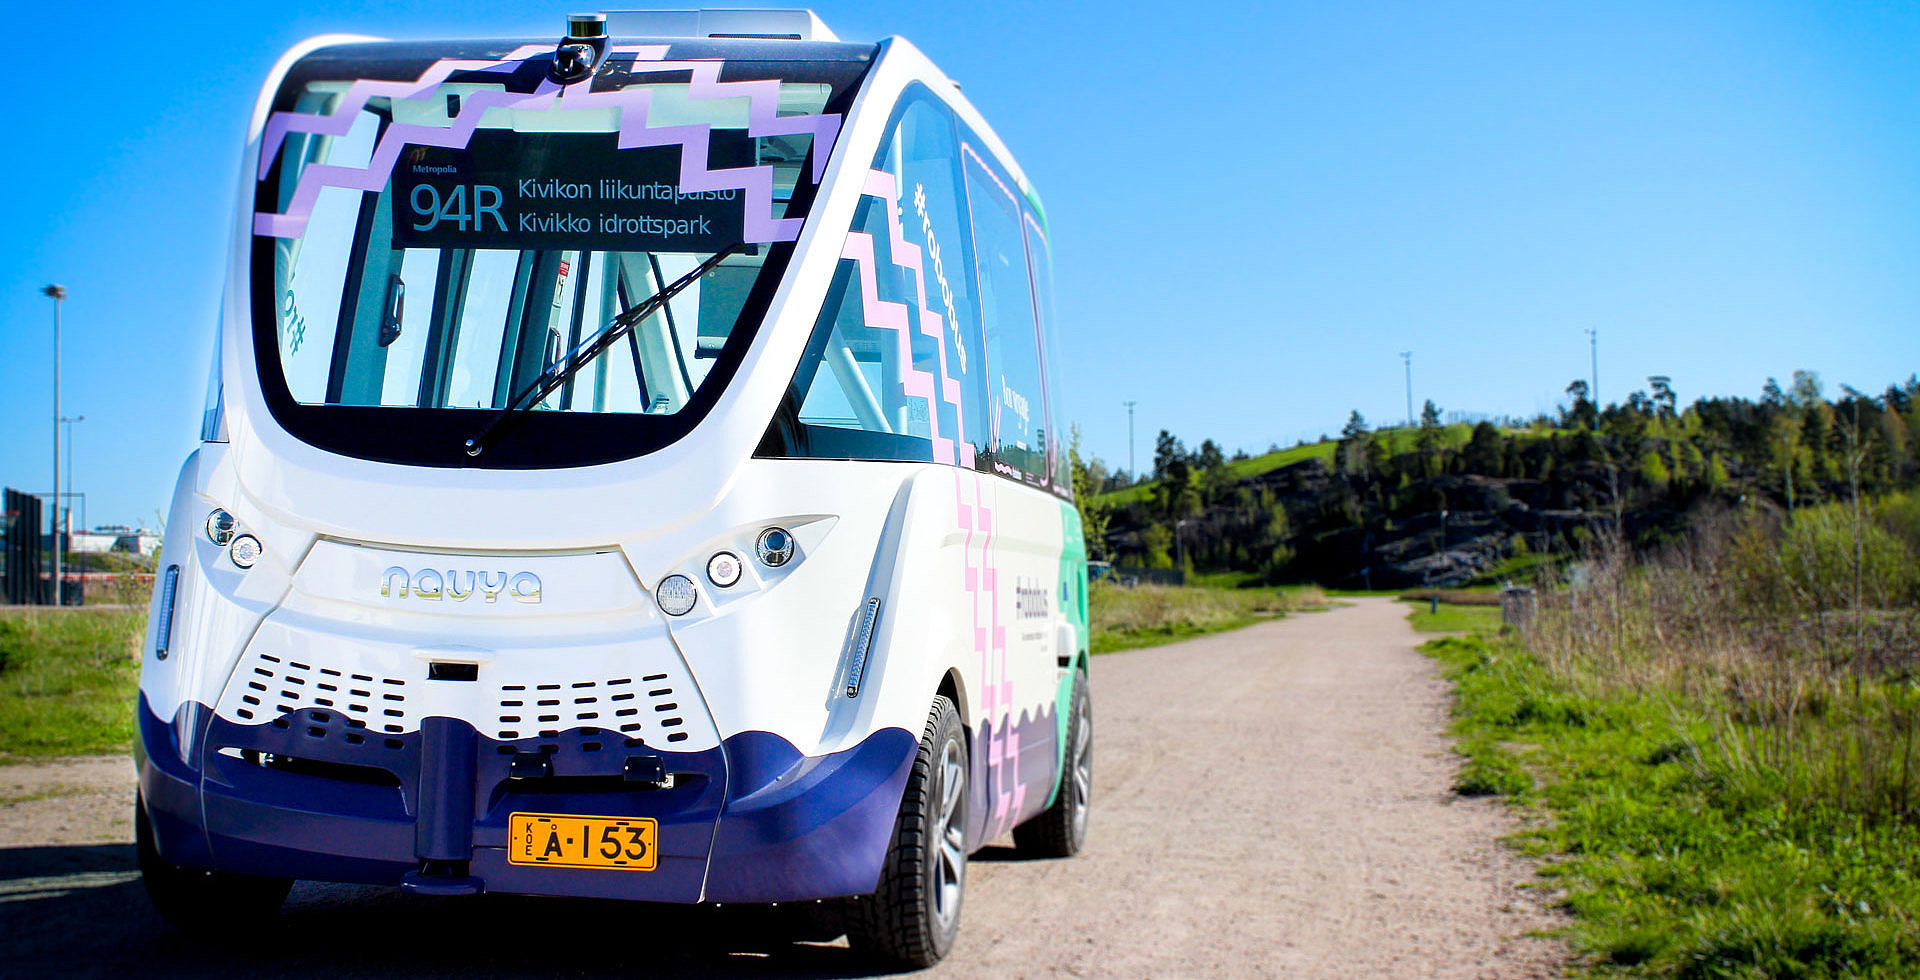 The self-driving electric minibus of Helsinki bus line 94R (picture: Milla Aman/Oscar Nissin)